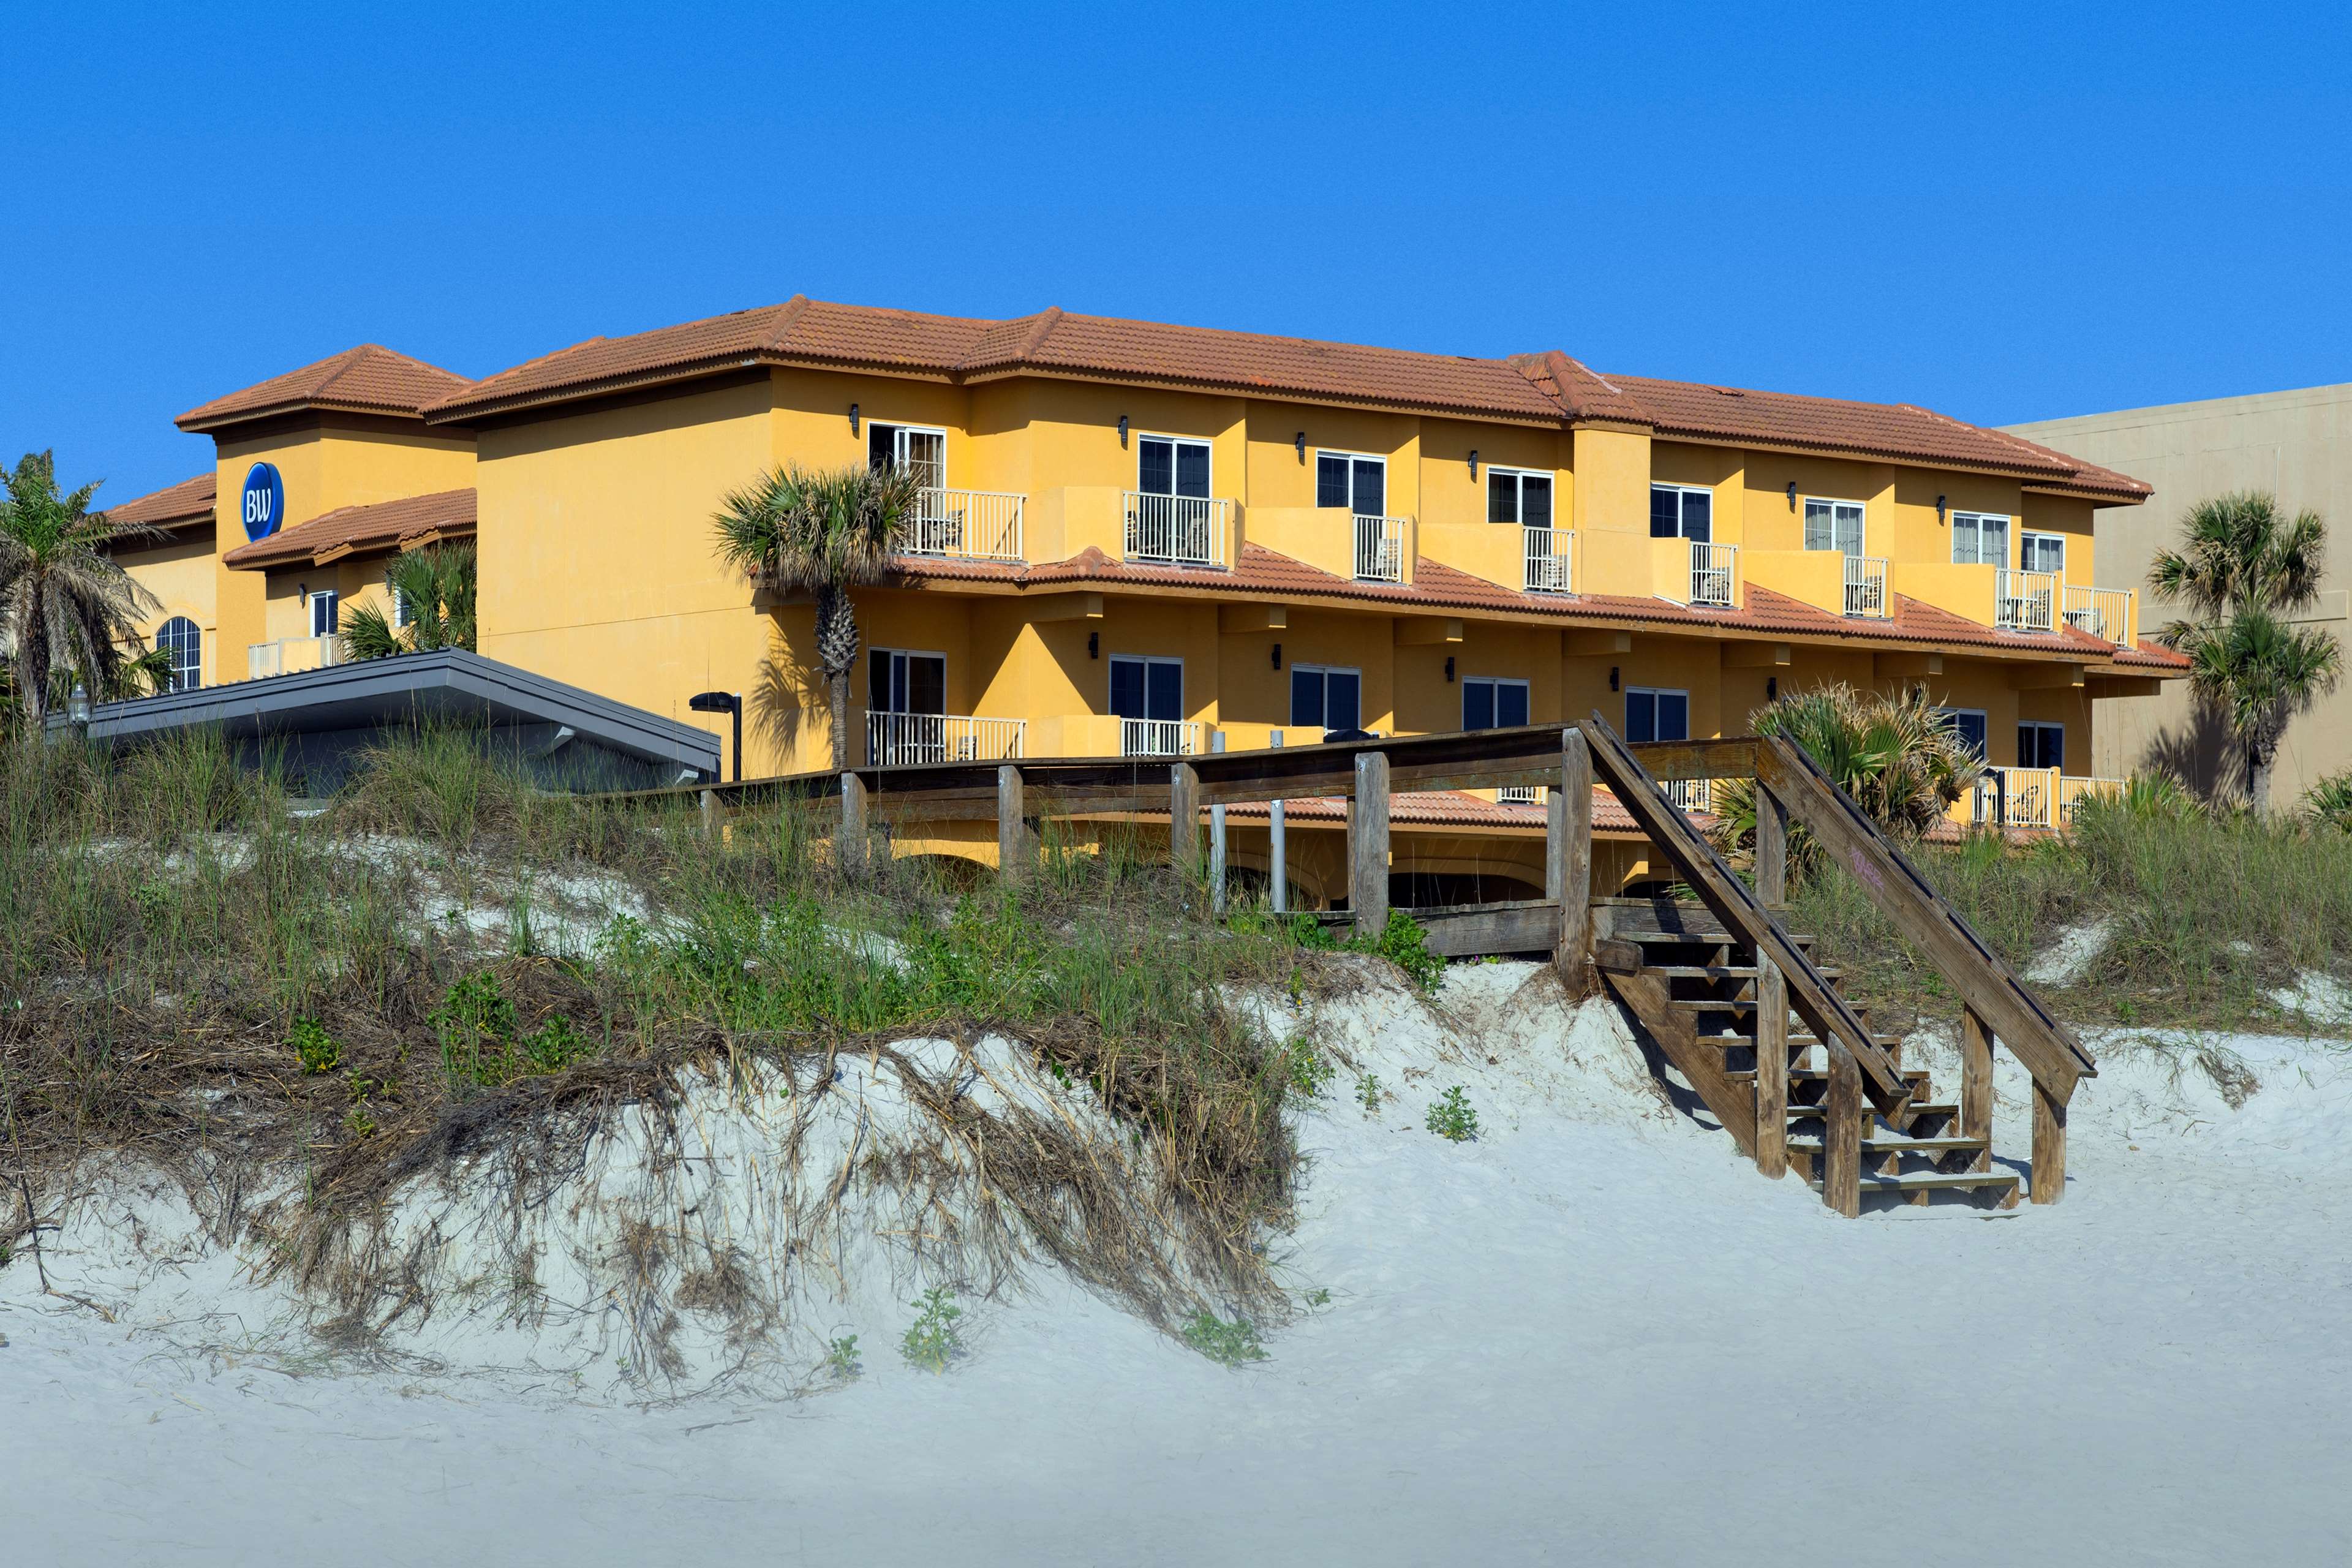 Exterior From the Beach